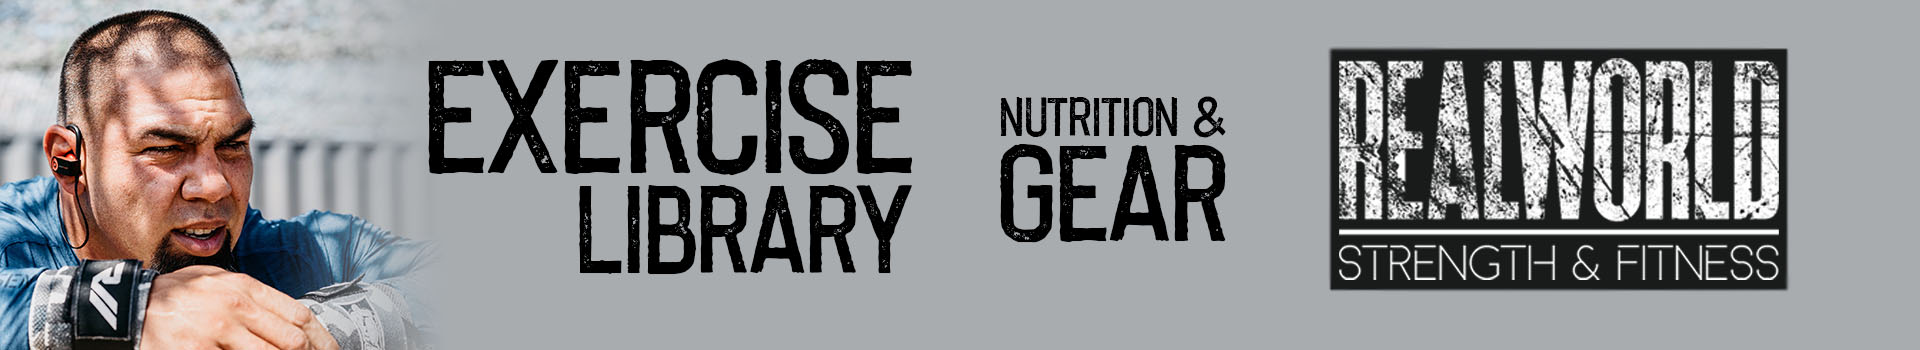 Nutrition and Gear